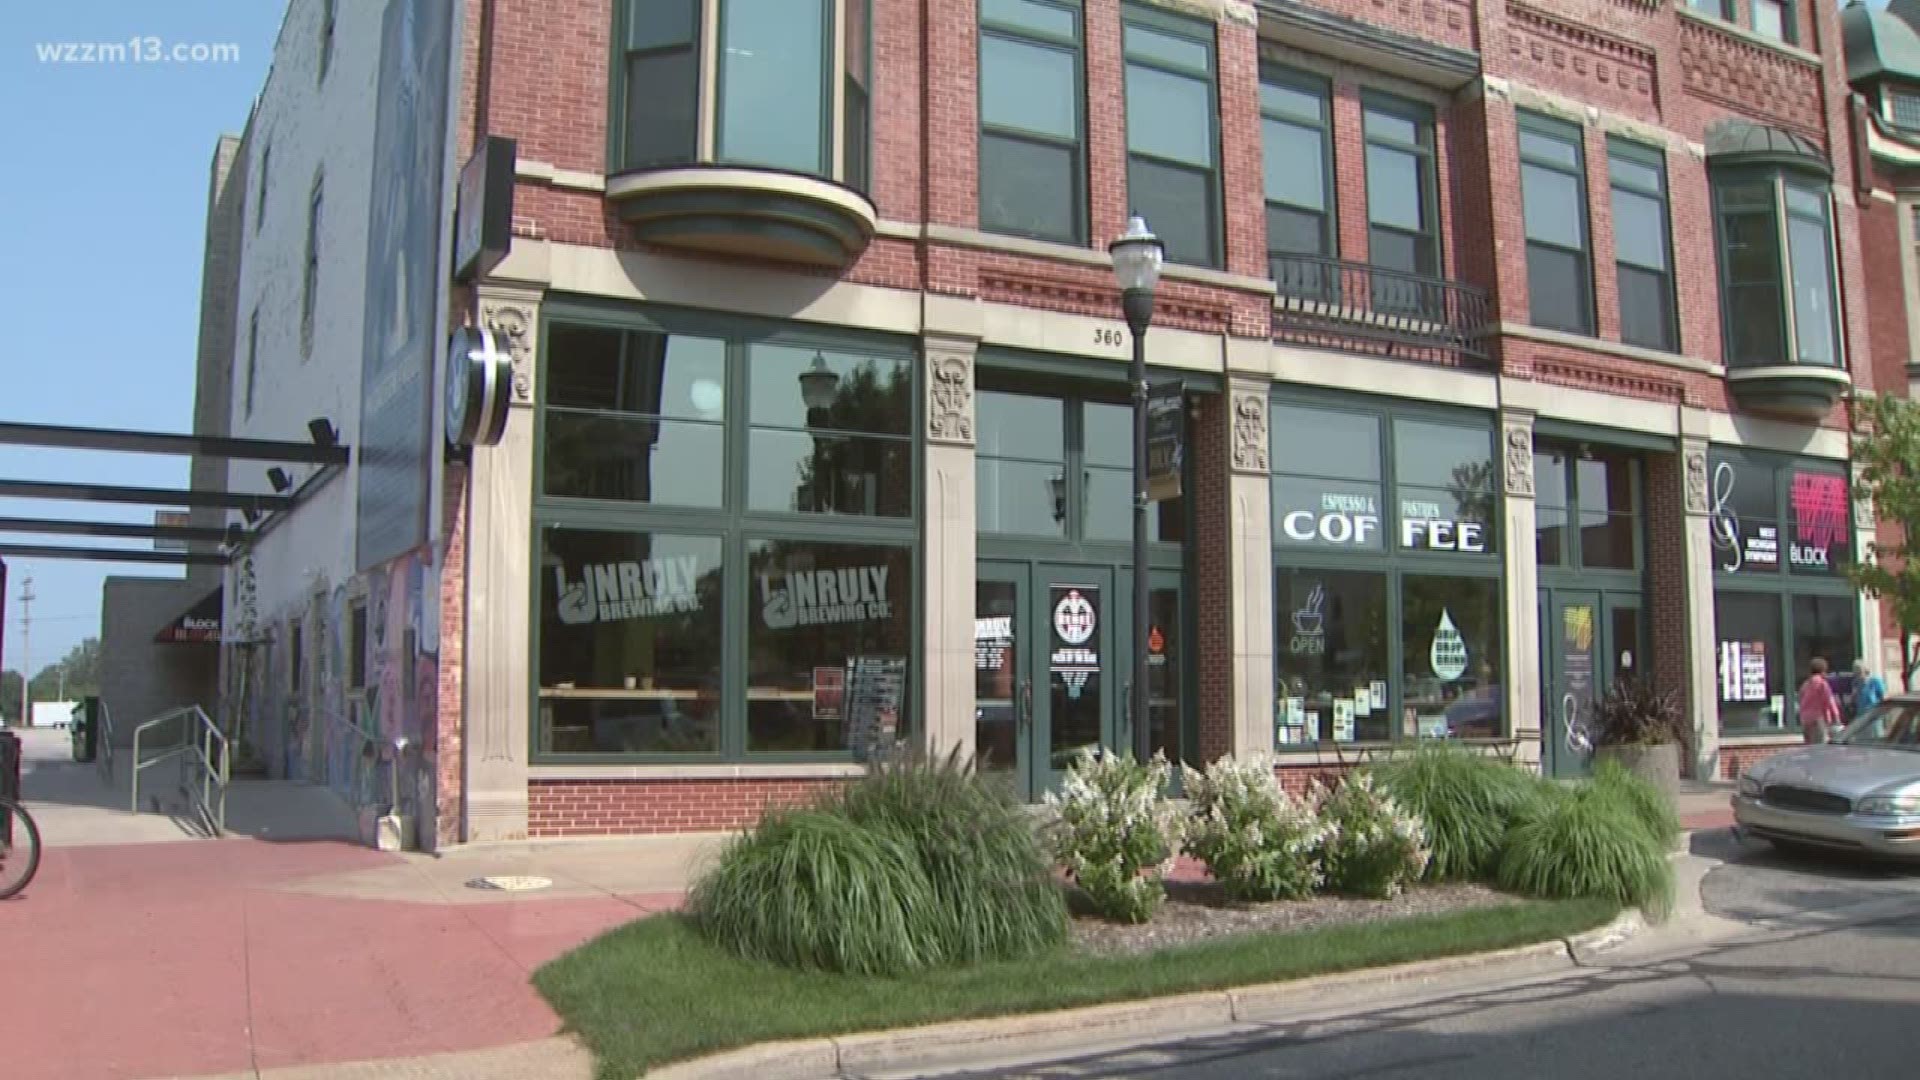 City leaders in Muskegon are sharing their plans for the future of downtown.